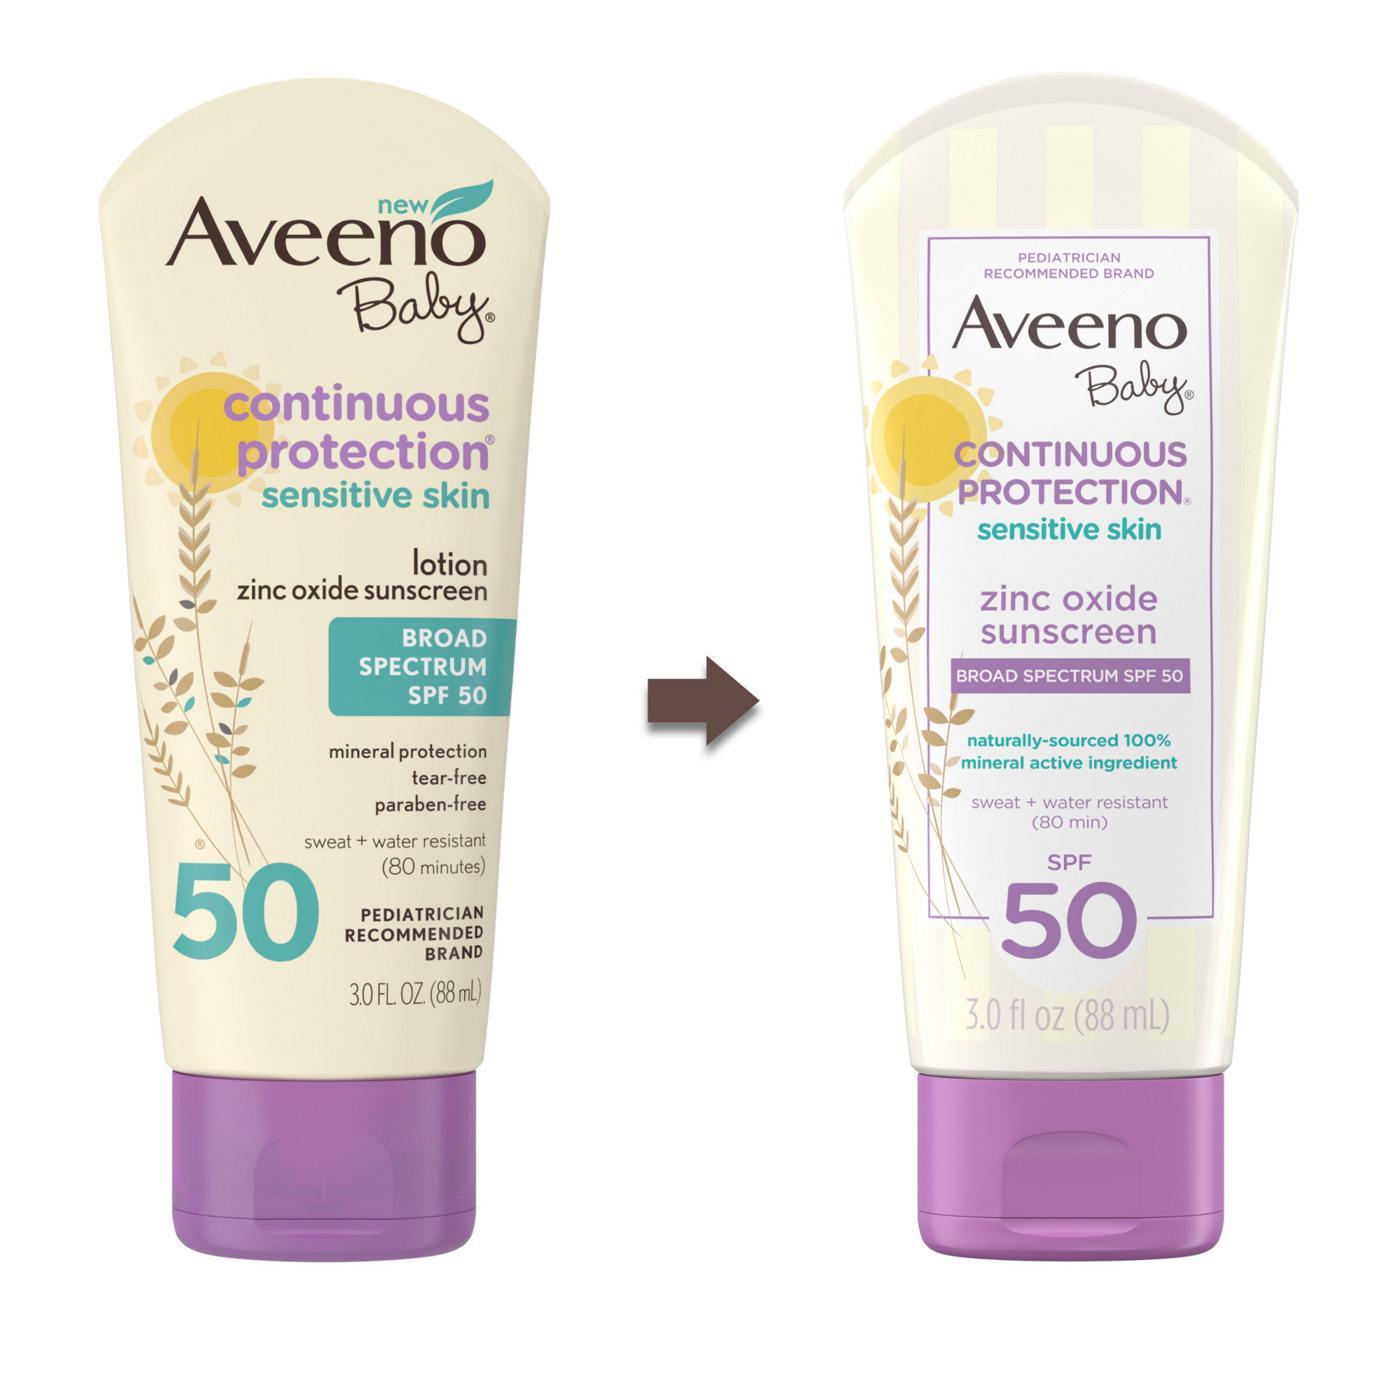 Aveeno Baby Continuous Protection Sensitive Skin Lotion Zinc Oxide Sunscreen With Broad Spectrum SPF 50; image 2 of 8